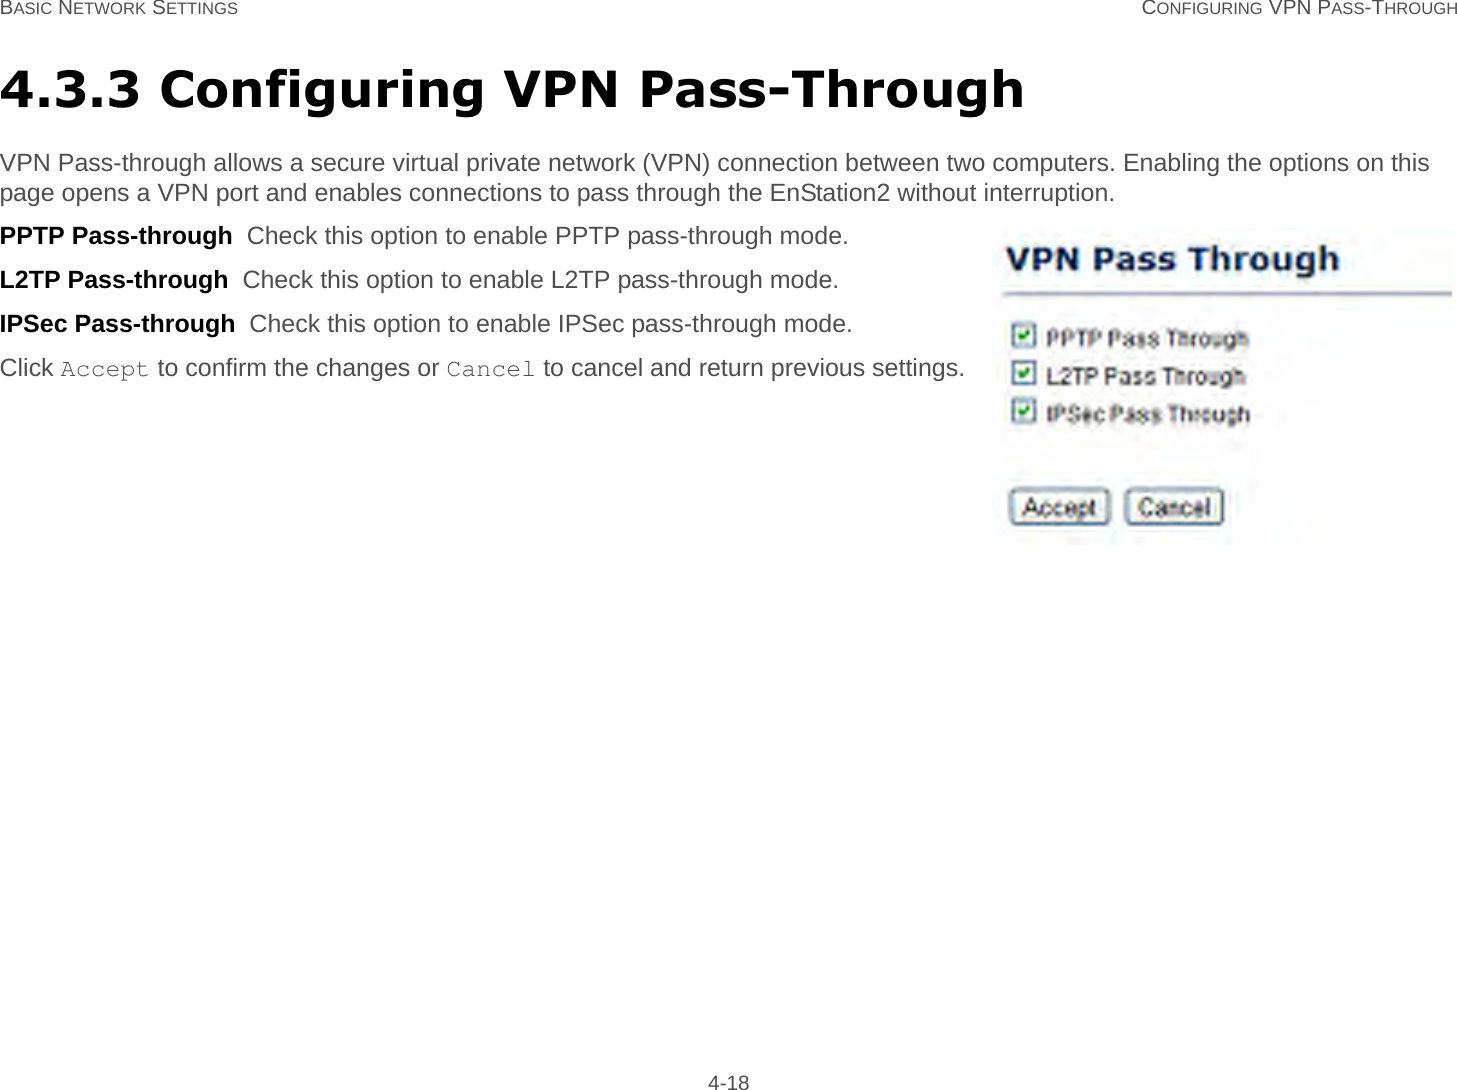 BASIC NETWORK SETTINGS CONFIGURING VPN PASS-THROUGH 4-184.3.3 Configuring VPN Pass-ThroughVPN Pass-through allows a secure virtual private network (VPN) connection between two computers. Enabling the options on this page opens a VPN port and enables connections to pass through the EnStation2 without interruption.PPTP Pass-through  Check this option to enable PPTP pass-through mode.L2TP Pass-through  Check this option to enable L2TP pass-through mode.IPSec Pass-through  Check this option to enable IPSec pass-through mode.Click Accept to confirm the changes or Cancel to cancel and return previous settings.